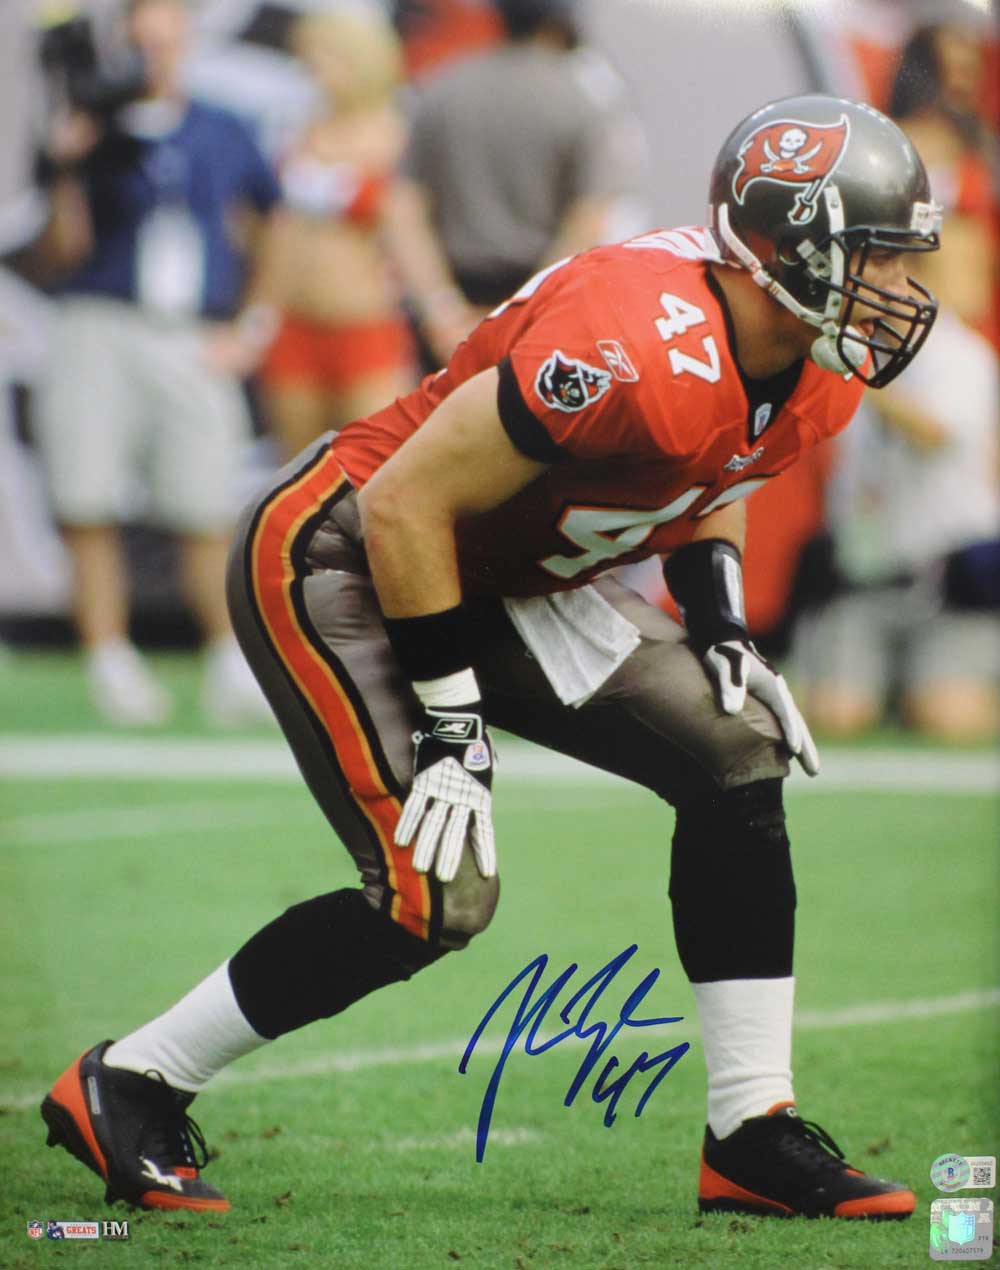 John Lynch Autographed/Signed Tampa Bay Buccaneers 16x20 Photo BAS 31572